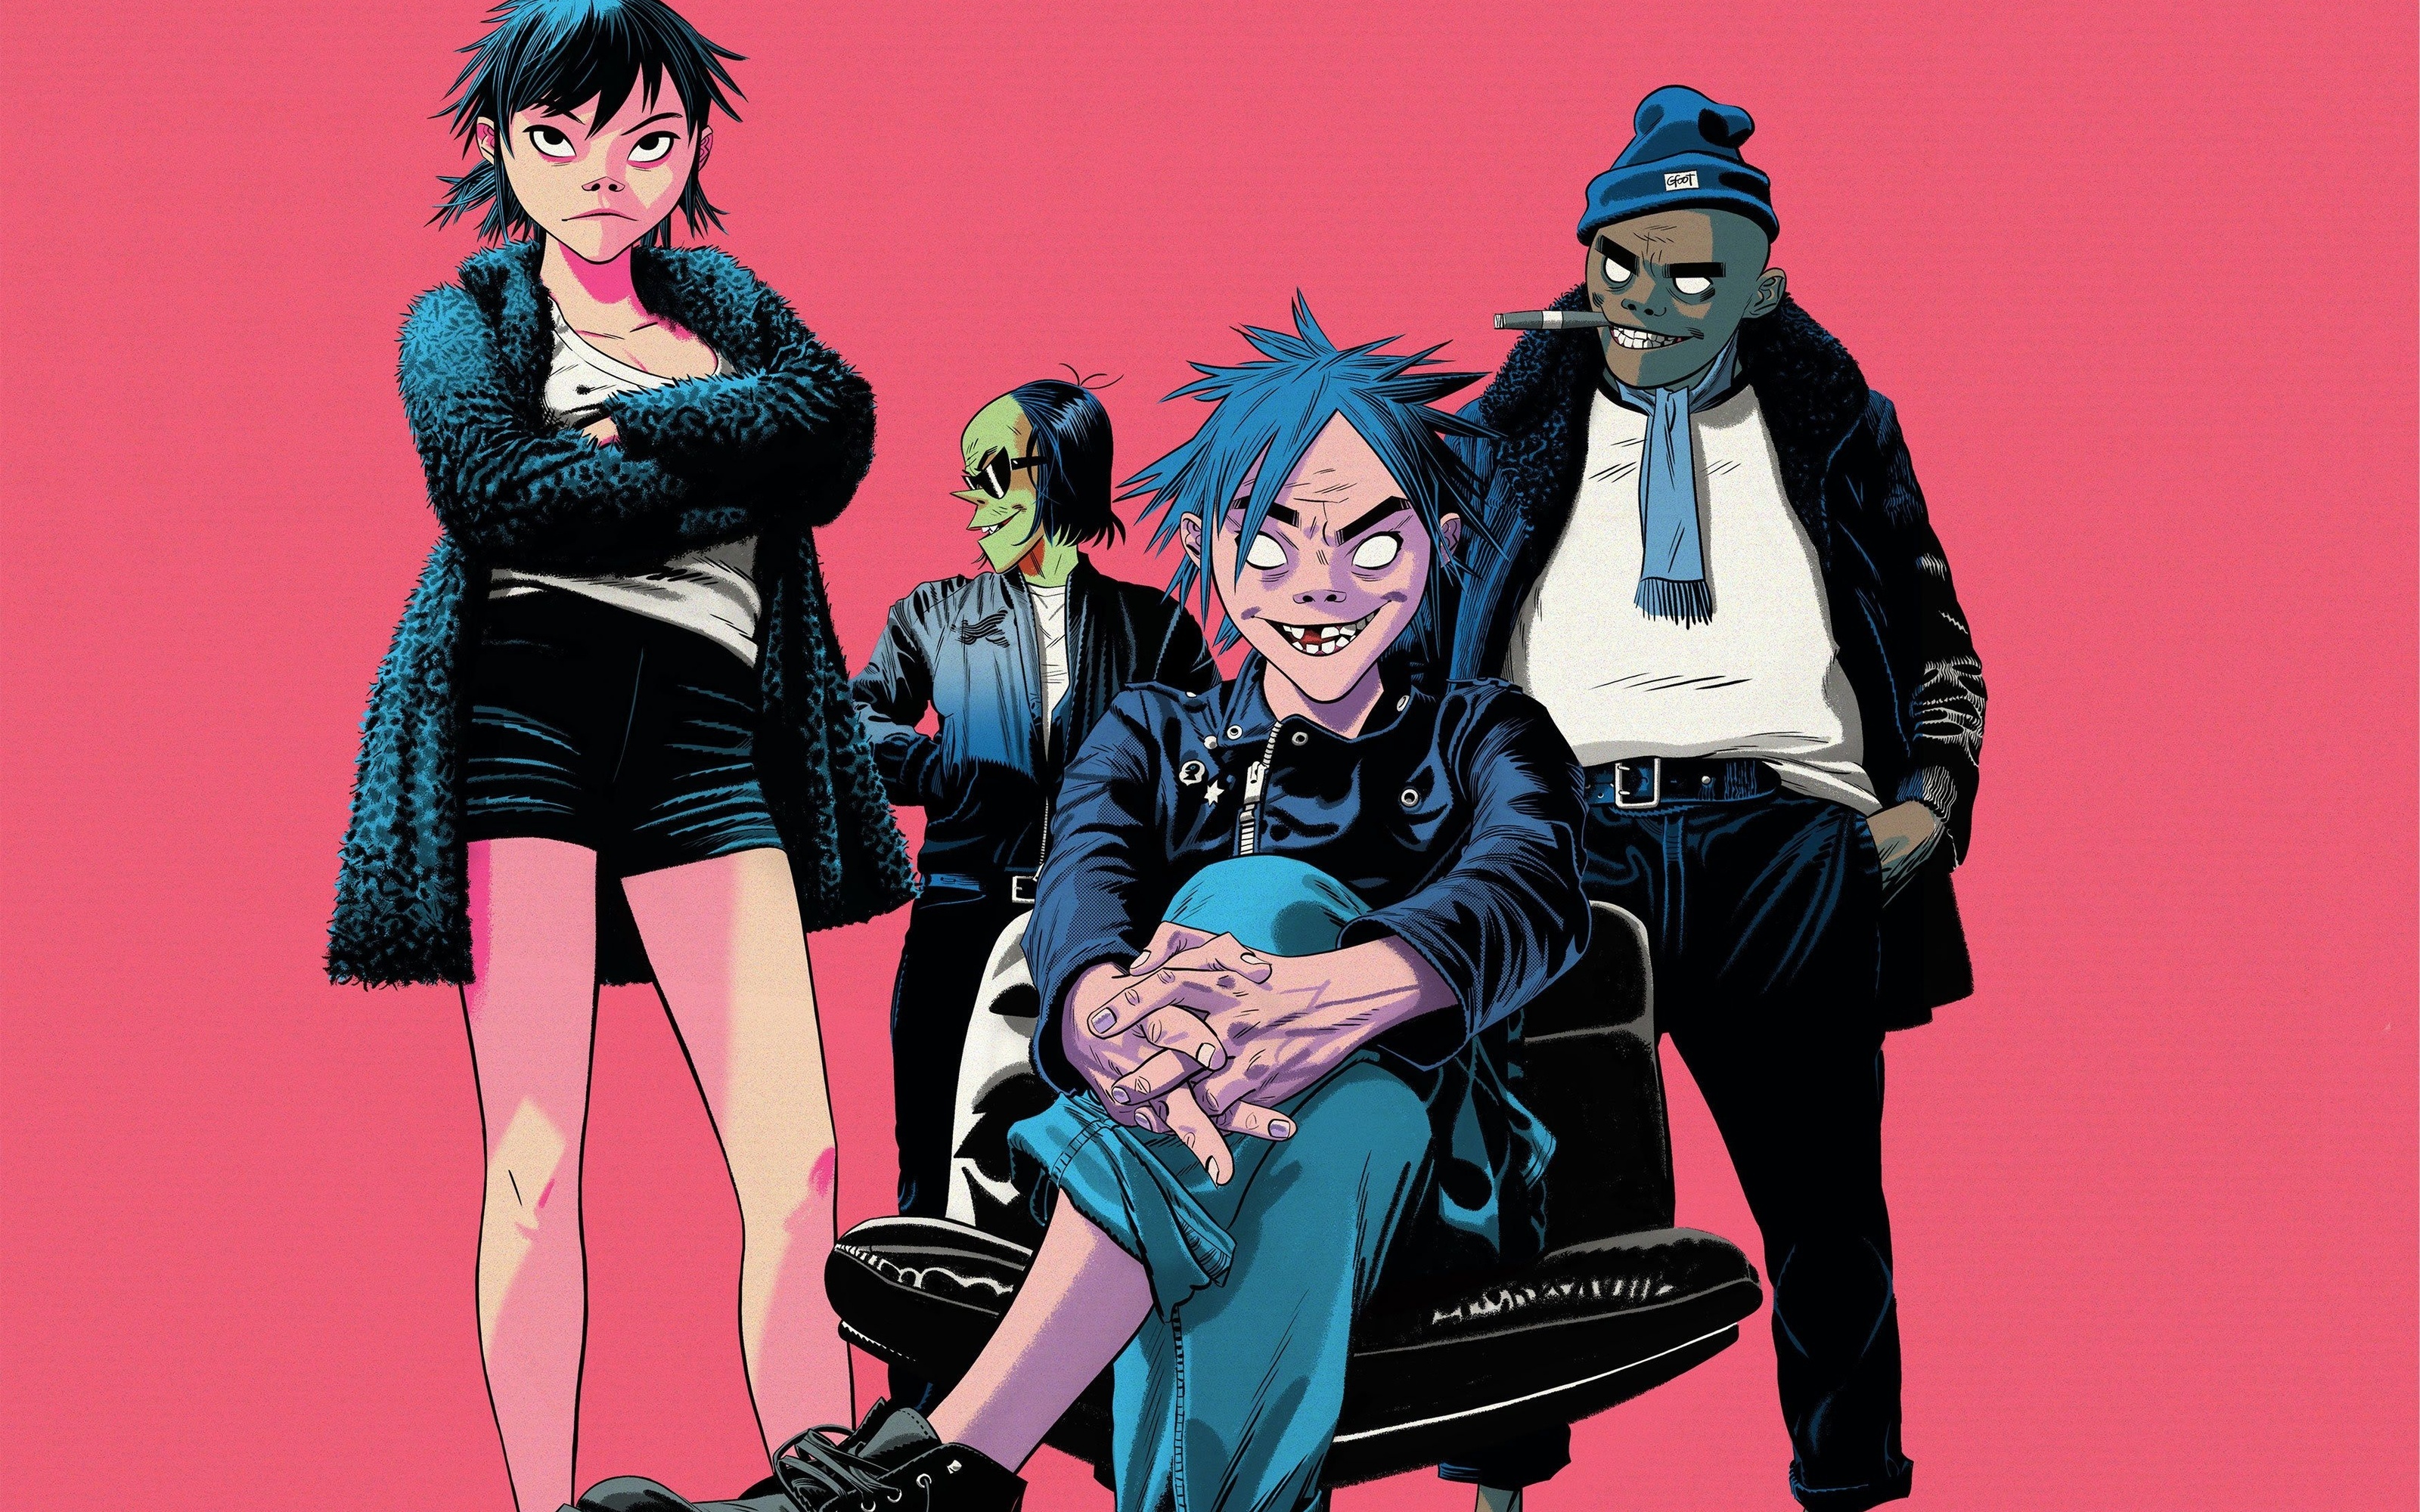 Gorillaz: The beloved raunchy animated band members, 2-D, Noodle, Murdoc Niccals, and Russel Hobbs. 3200x2000 HD Background.